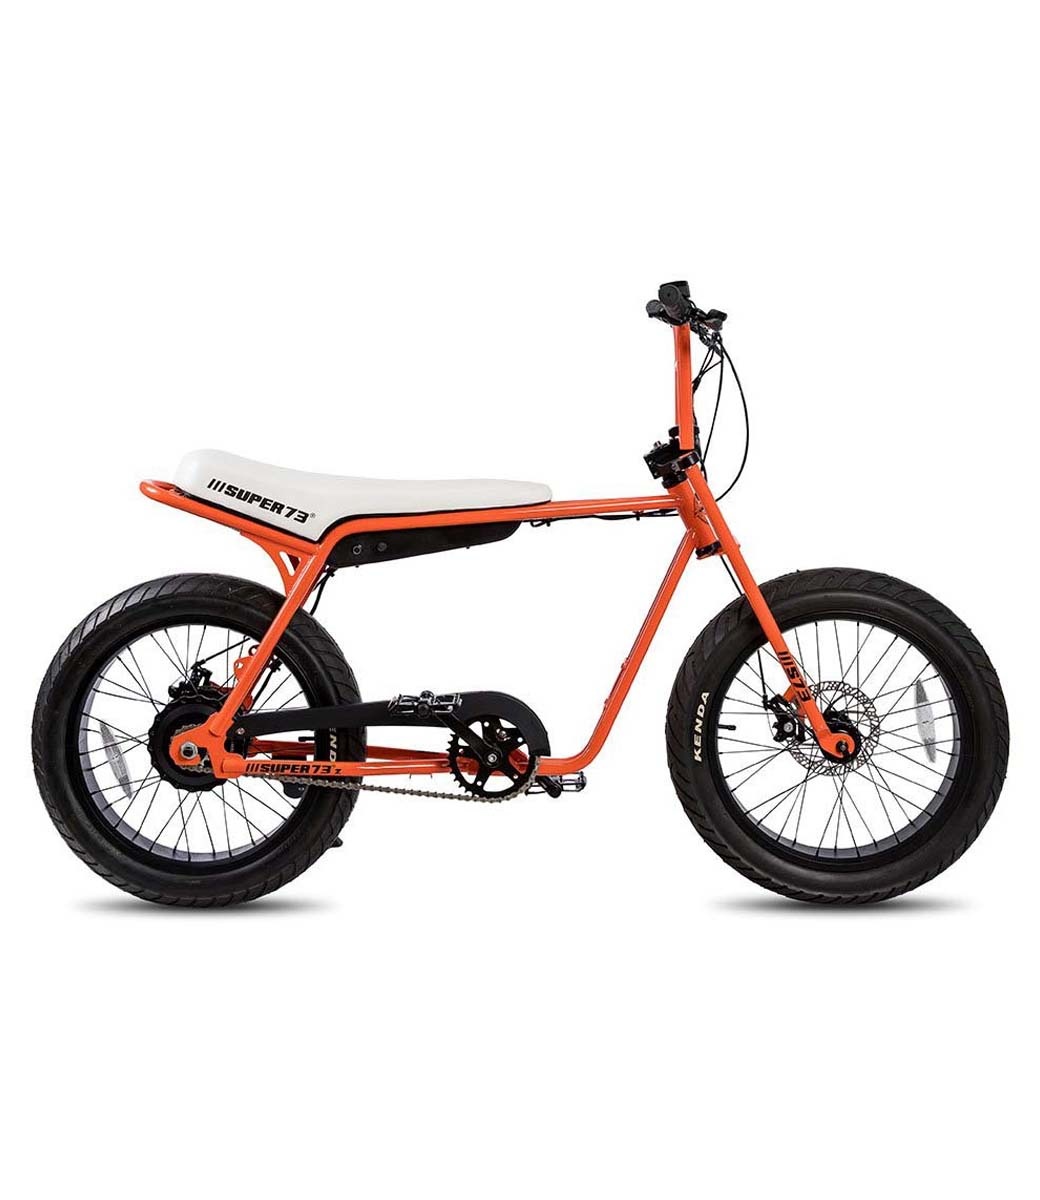 SUPER73-ZG Astro Orange The SUPER73-ZG is perfect for exploring the city. The compact frame and the EPAC 250W internal hub motor make an excellent vehicle for anyone who wants the superior feeling of a regular SUPER73 with a smaller frame.